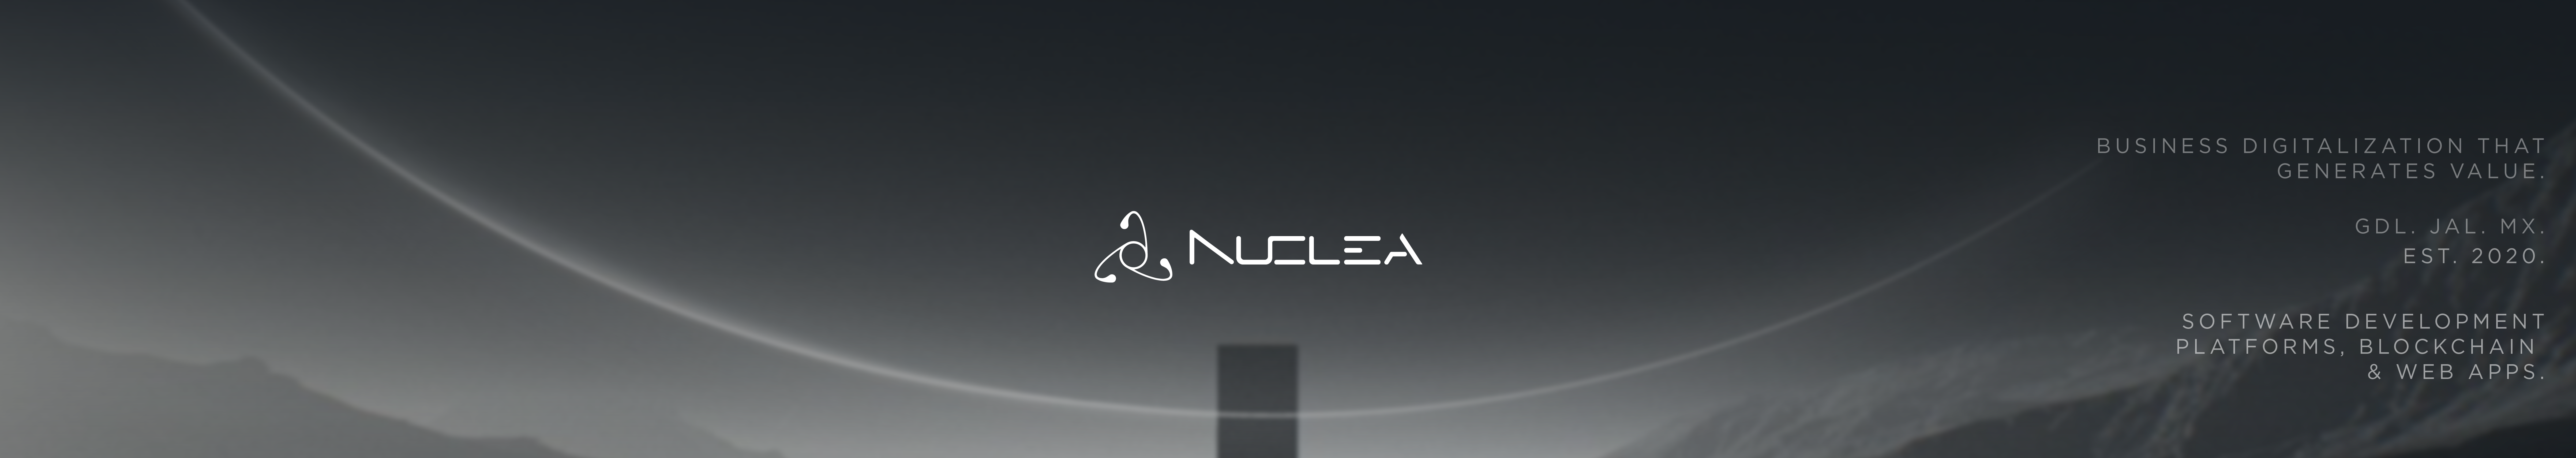 Nuclea Solutions's profile banner